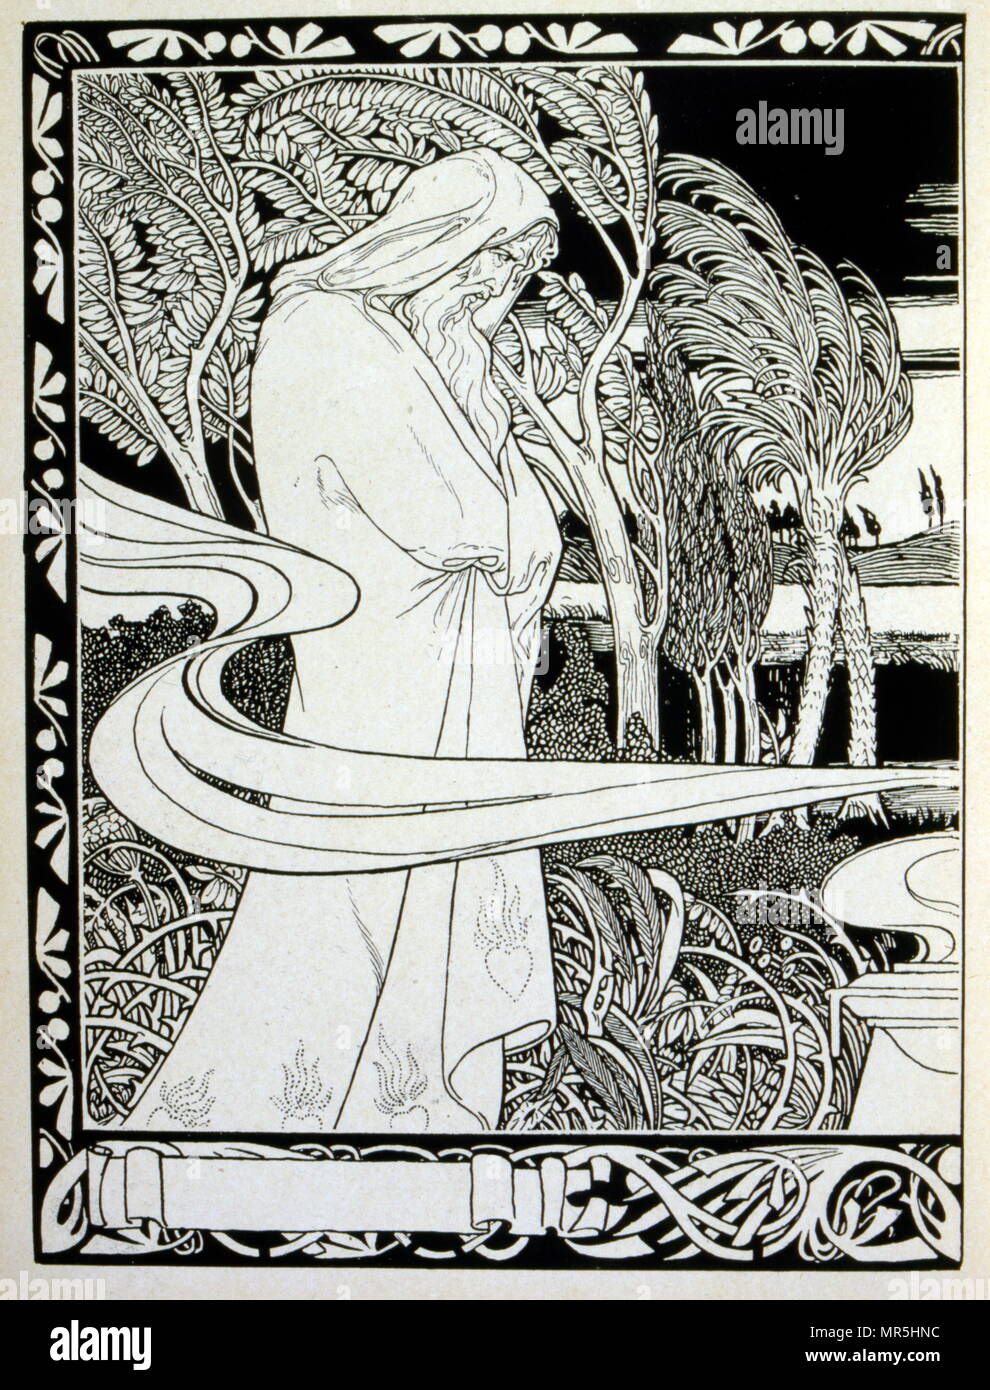 Judah', a collection of ballads by the non-Jewish poet Börries von Münchhausen 1874 - 1945. Illustrated by Ephraim Moses Lilien (1874–1925), art nouveau illustrator and printmaker, noted for his art on Jewish themes. He is sometimes called the 'first Zionist artist. Münchhausen's relationship to Judaism remained ambivalent: Munchhausen did not consider the 'Jewish race' inferior, but merely wanted to prevent a 'mixture' with the non-Jewish Germans. Stock Photo